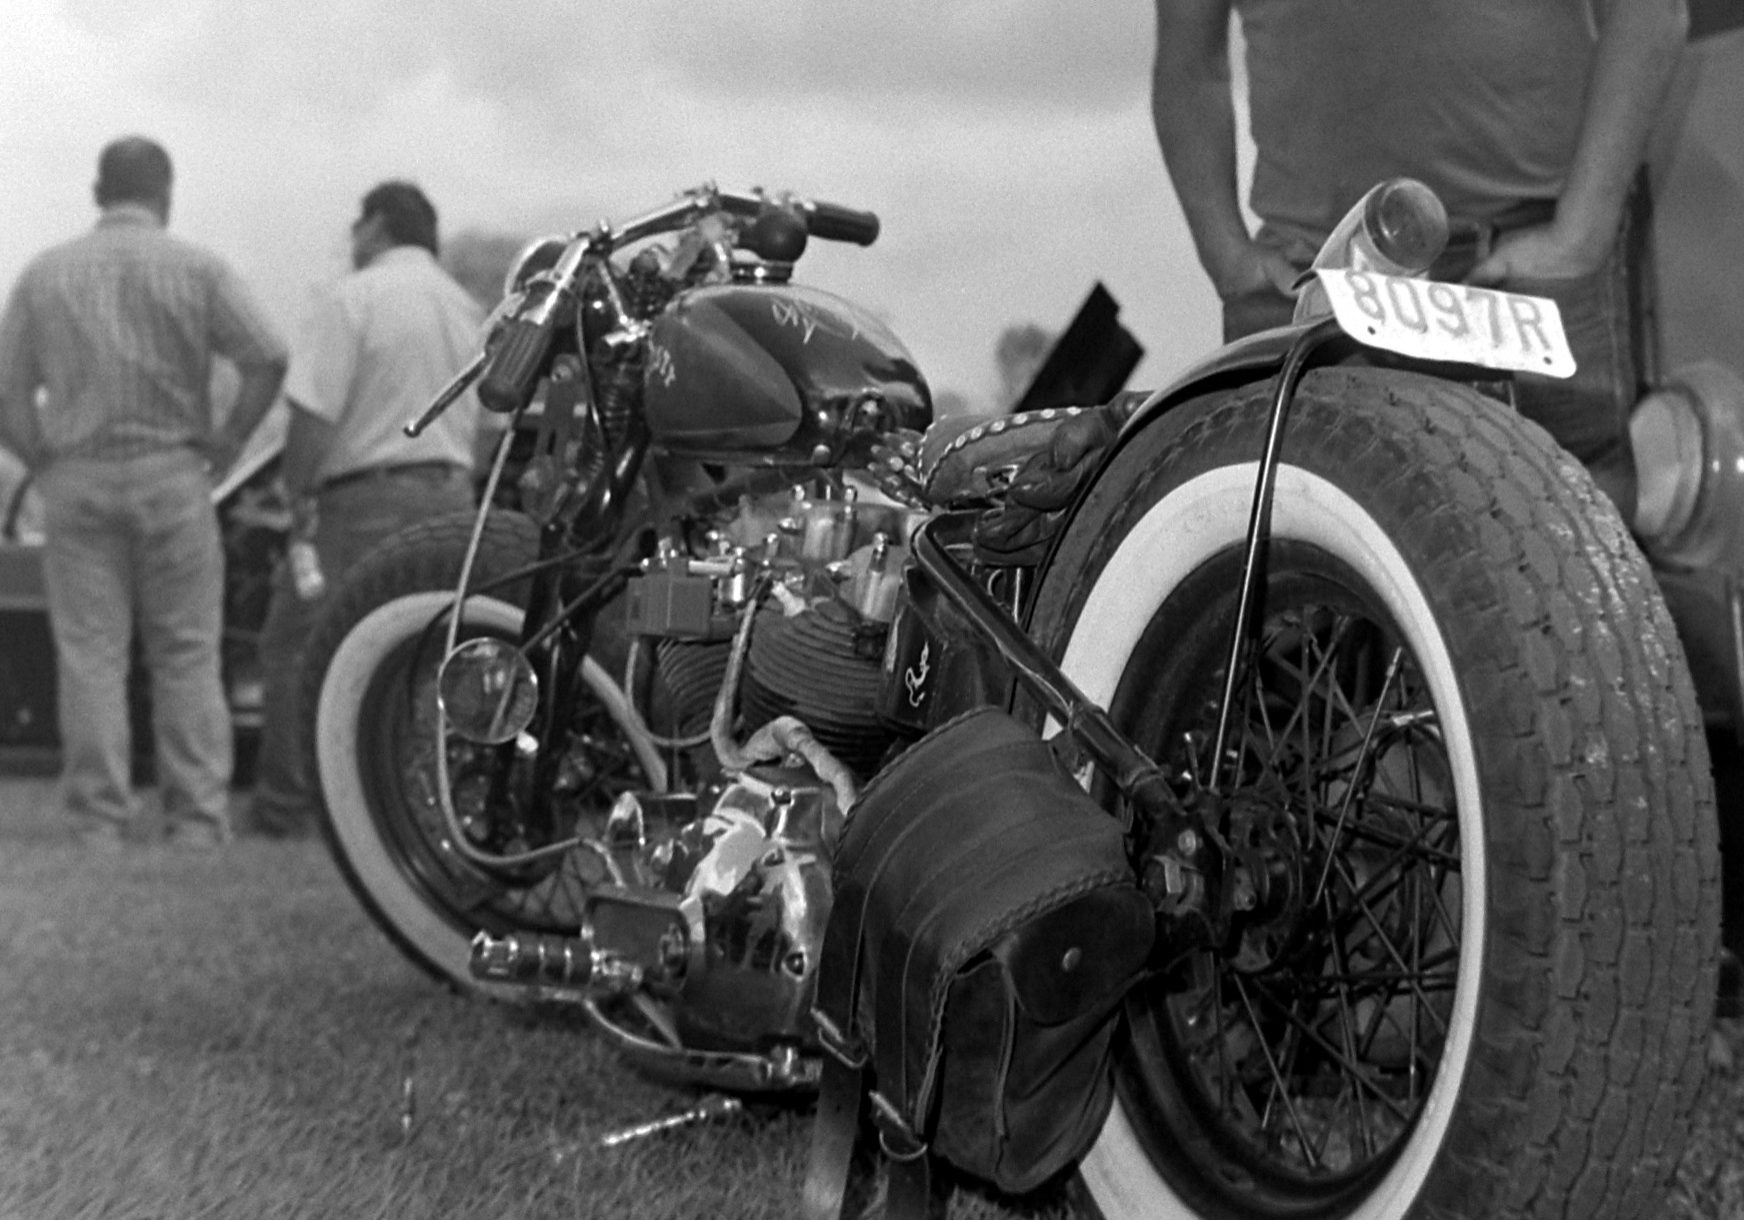 close up image of an old motorcycle propped up in grass, with a man with his hands in his pockets standing behind it, and two men far off in the left hand corner of the frame looking away.